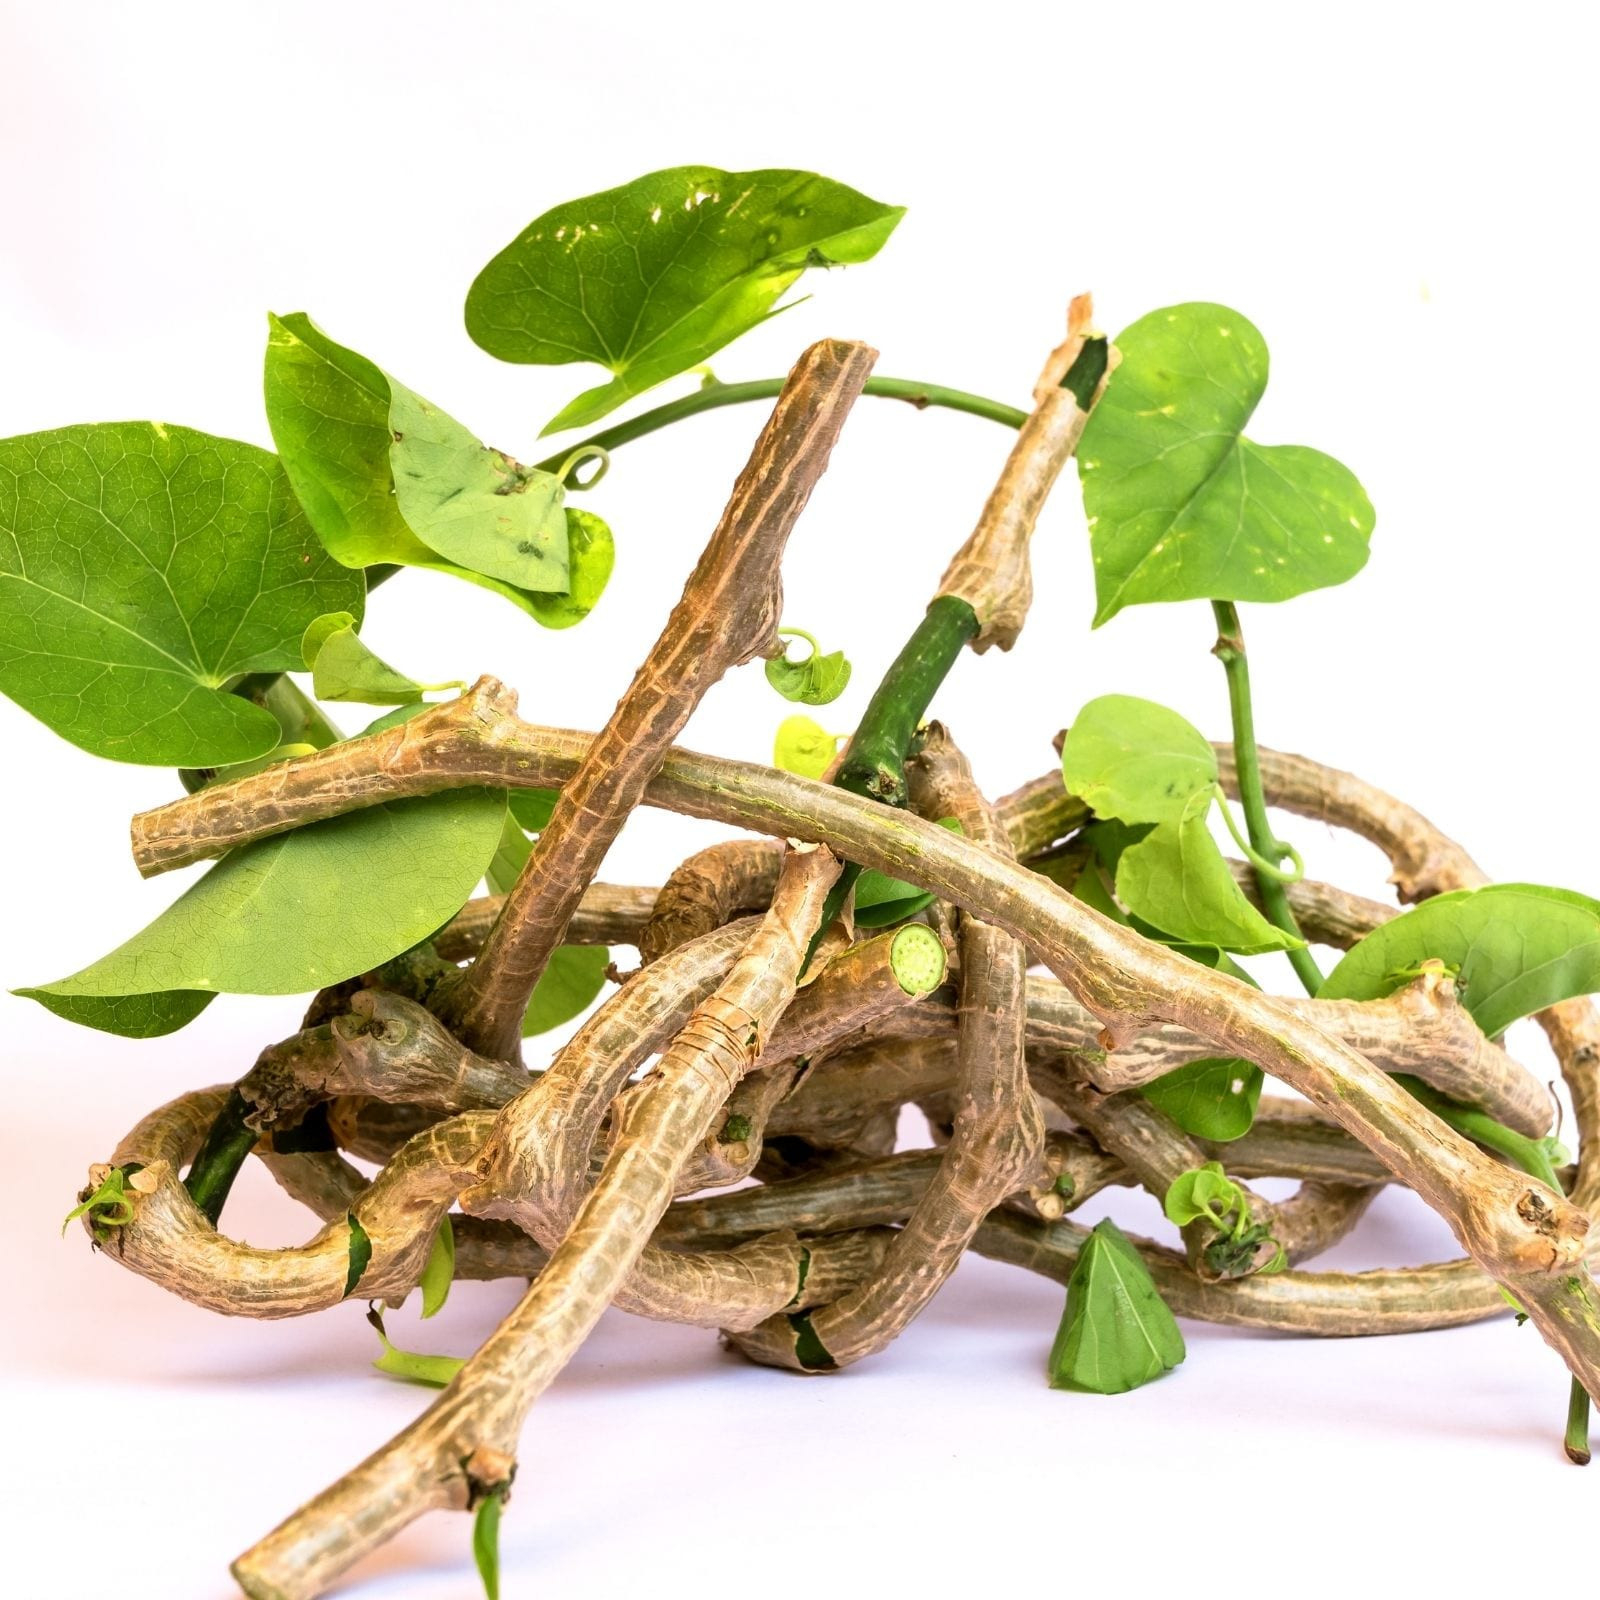 Indian Scientists Sequence The Genome Of Ayurvedic Medicinal Plant